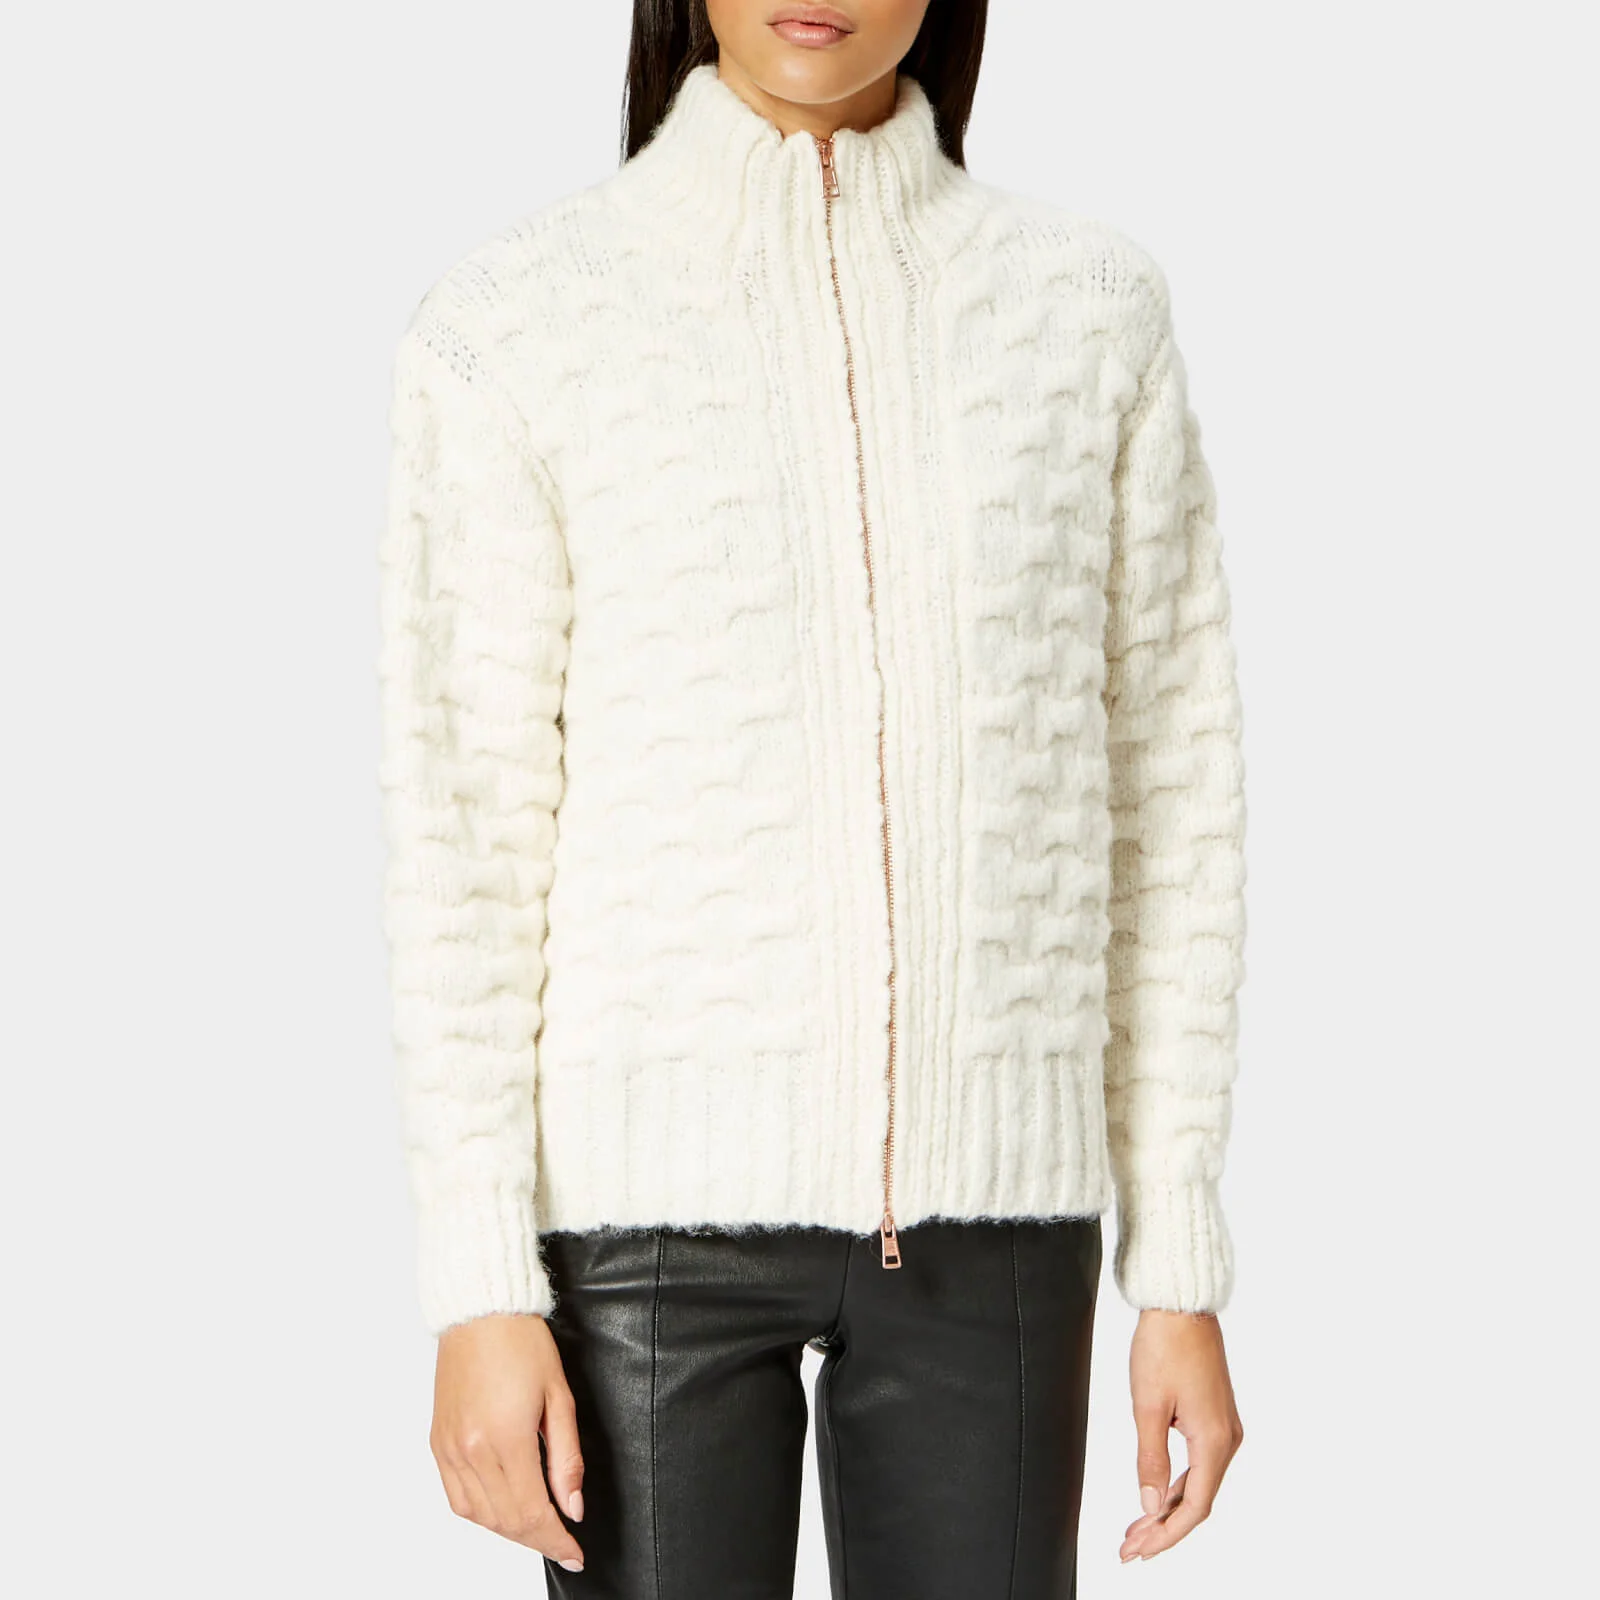 See By Chloé Women's Feminine Textured Knit Jacket - Beige/White Image 1